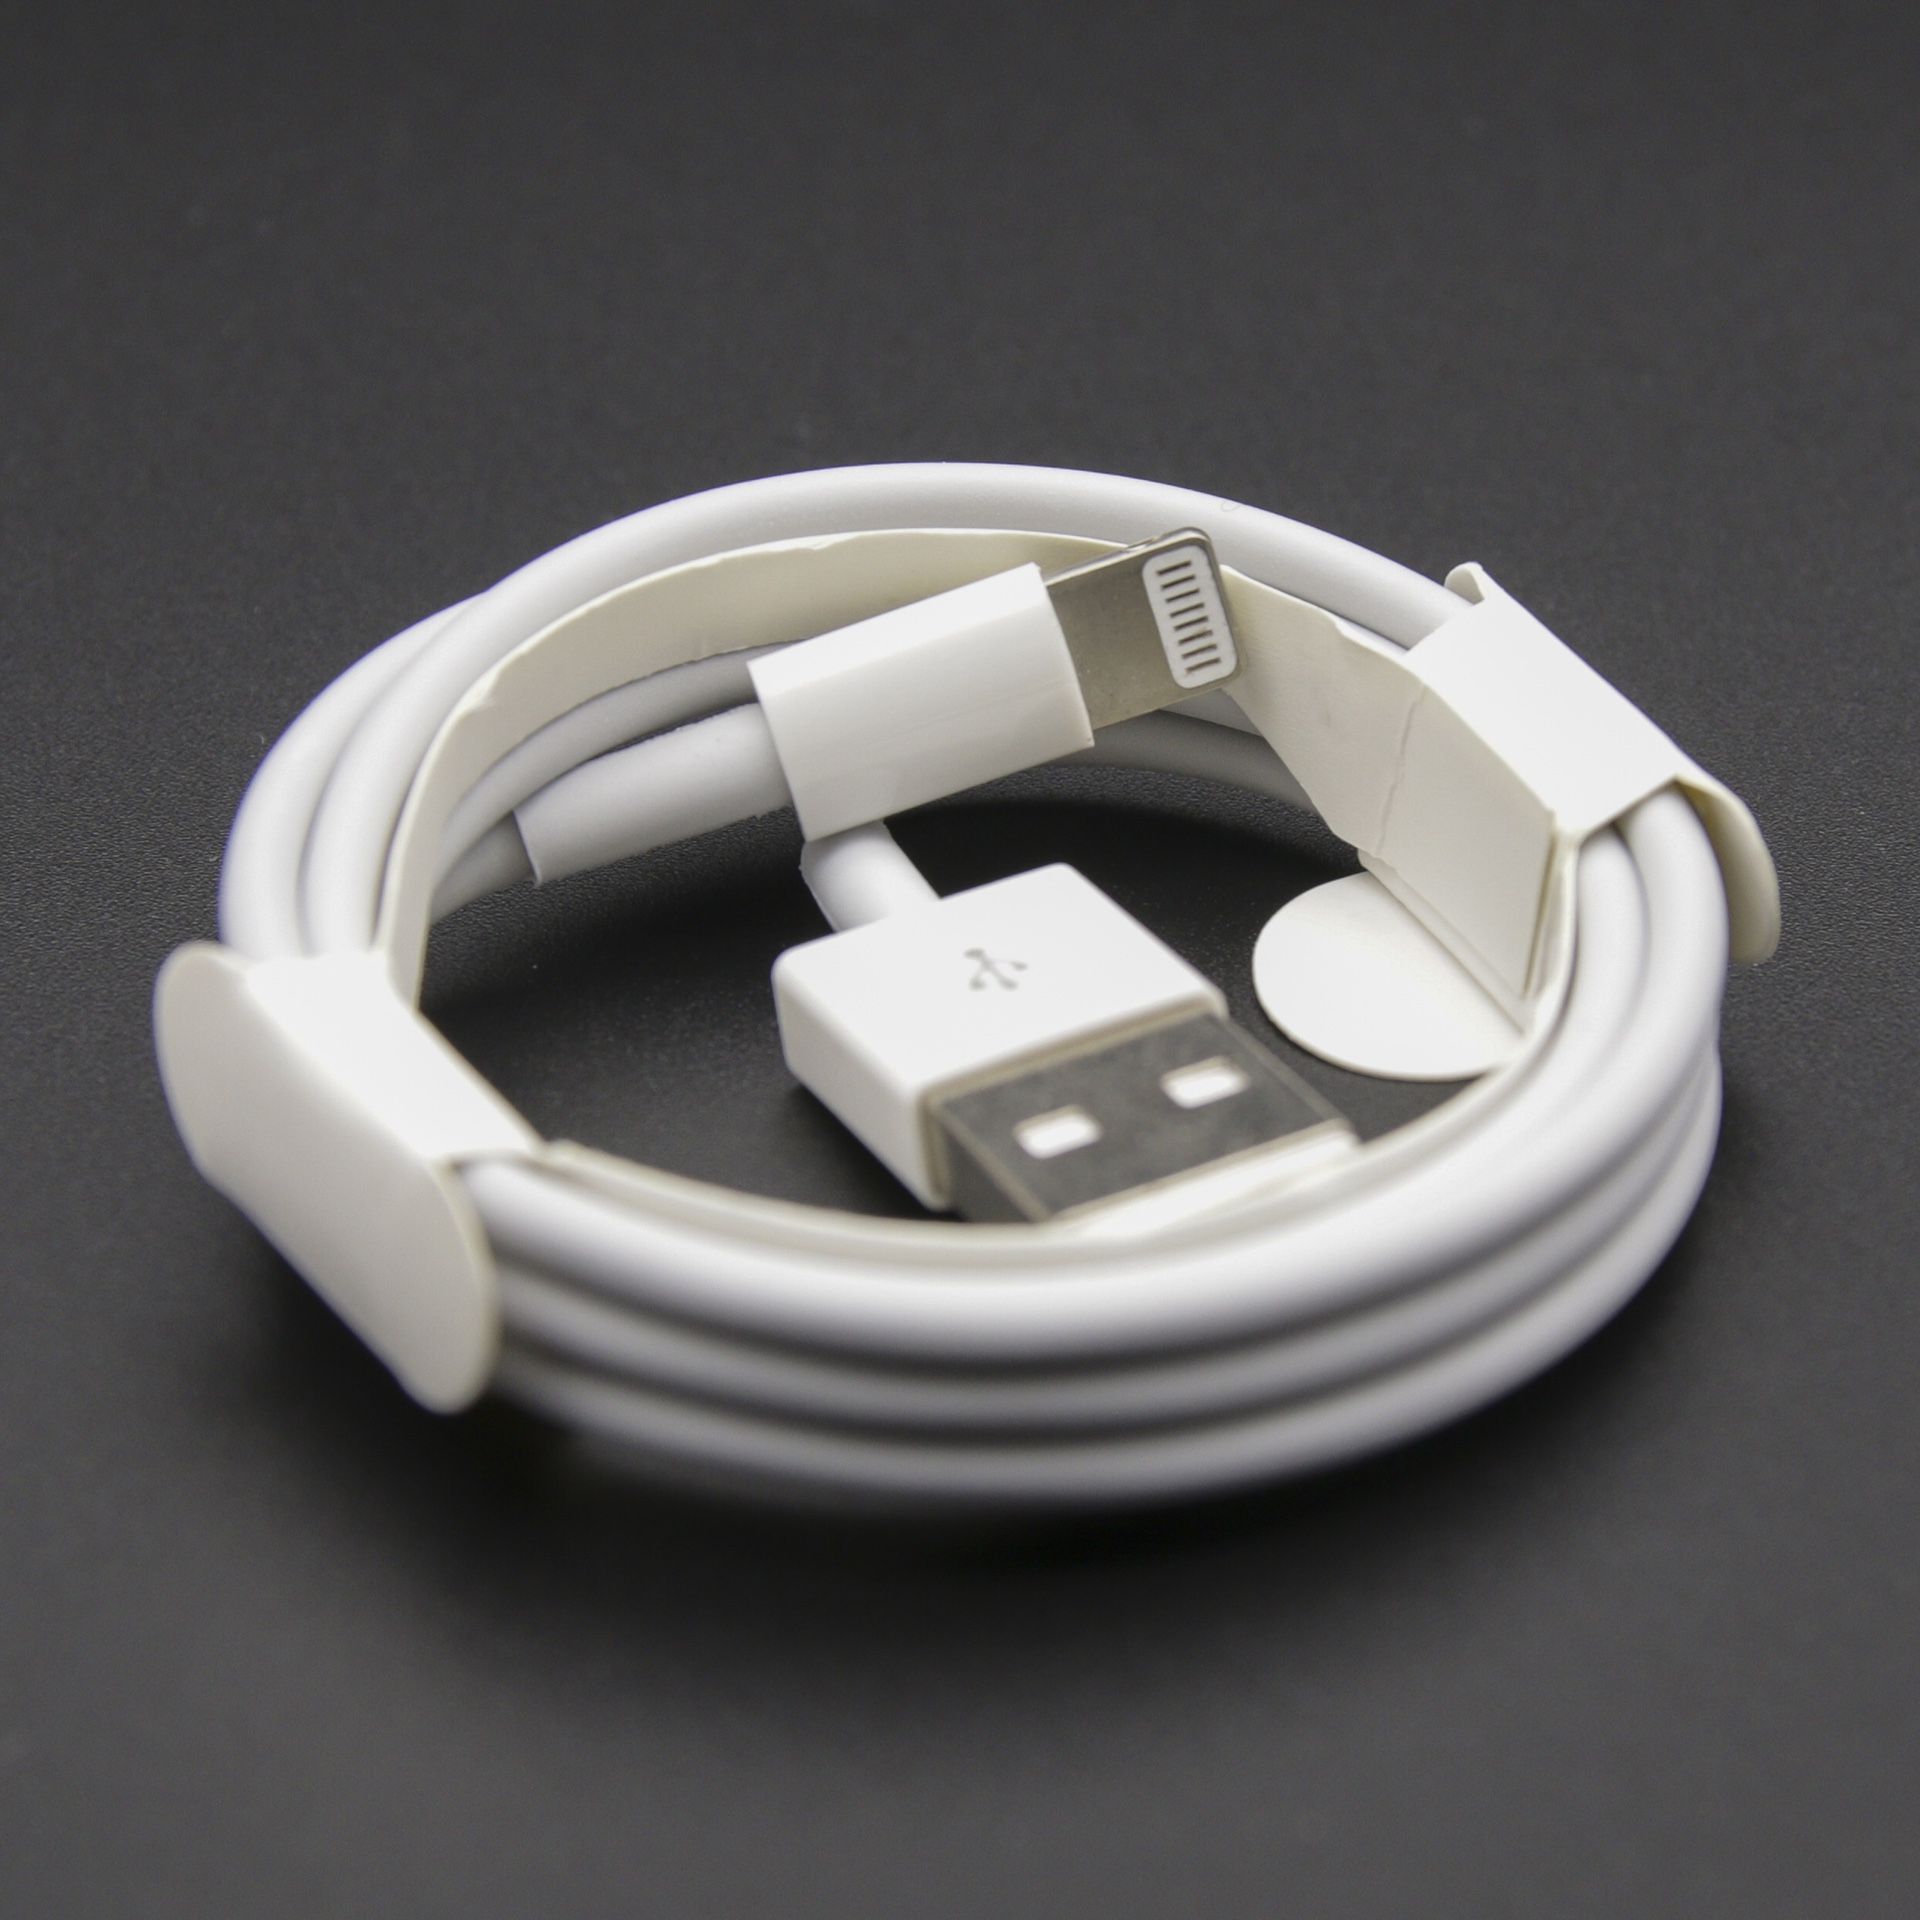 Apple Lightning USB Charging Cable - 3ft